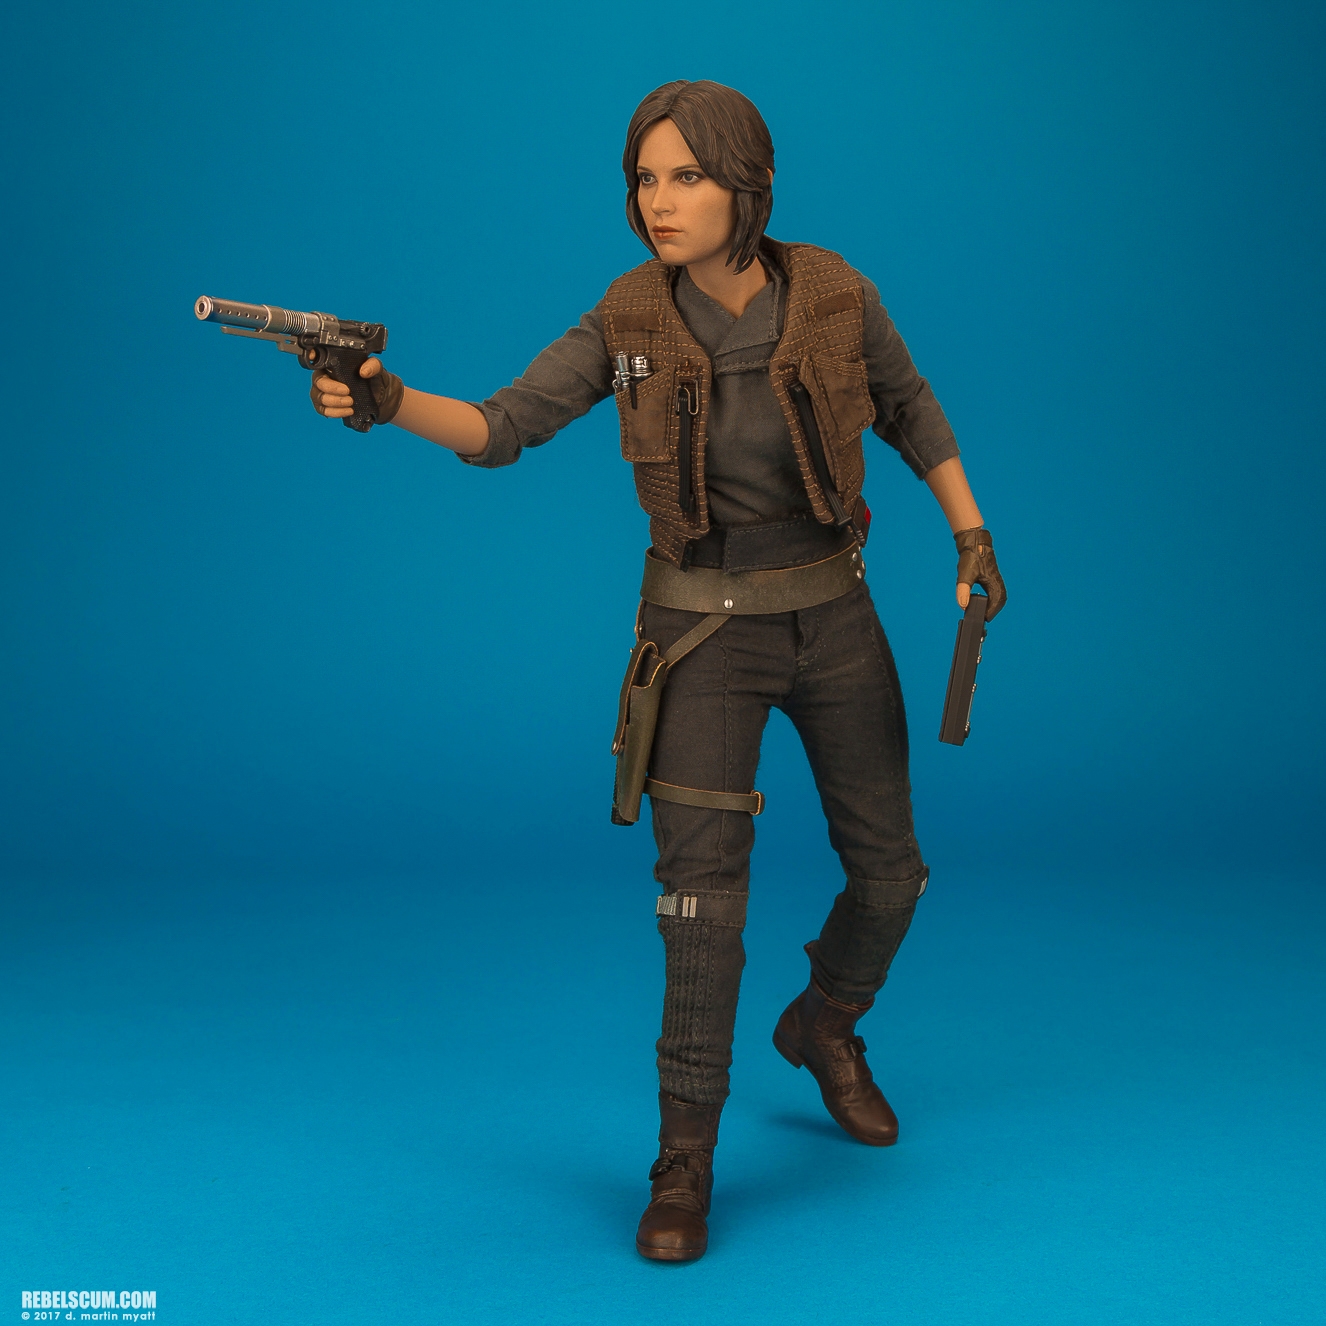 MMS405-Jyn-Erso-Deluxe-Star-Wars-Rogue-One-Hot-Toys-055.jpg